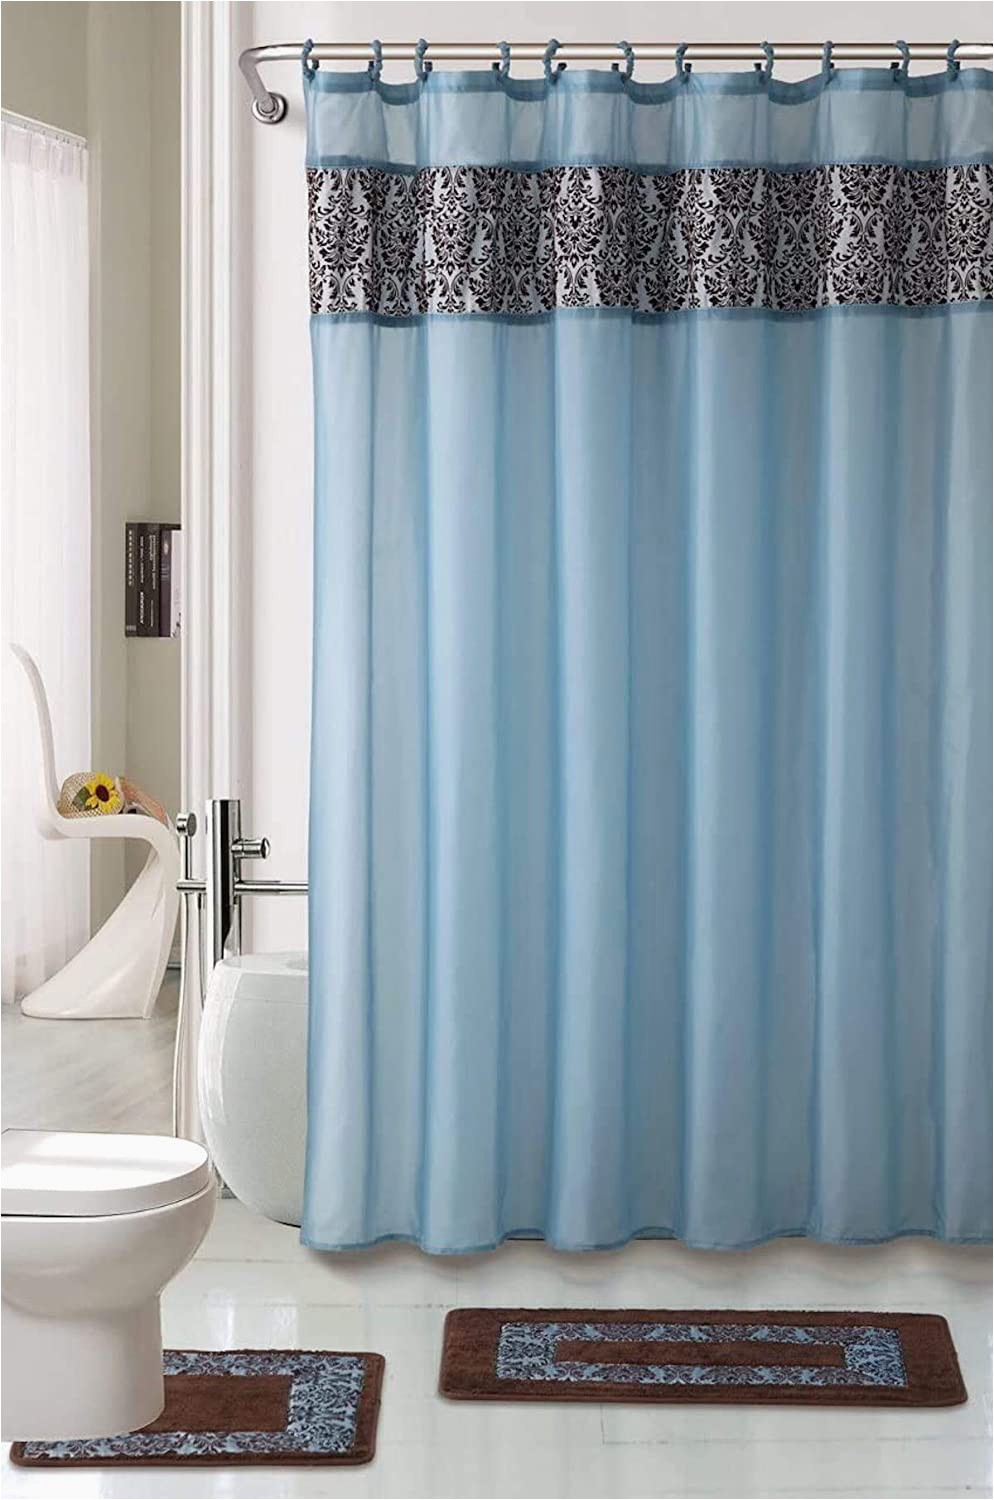 Matching Bathroom Rugs and Shower Curtains Wpm 4 Piece Luxury Majestic Flocking Blue Bath Rug Set 2 Piece Bathroom Rugs with Fabric Shower Curtain and Matching Rings